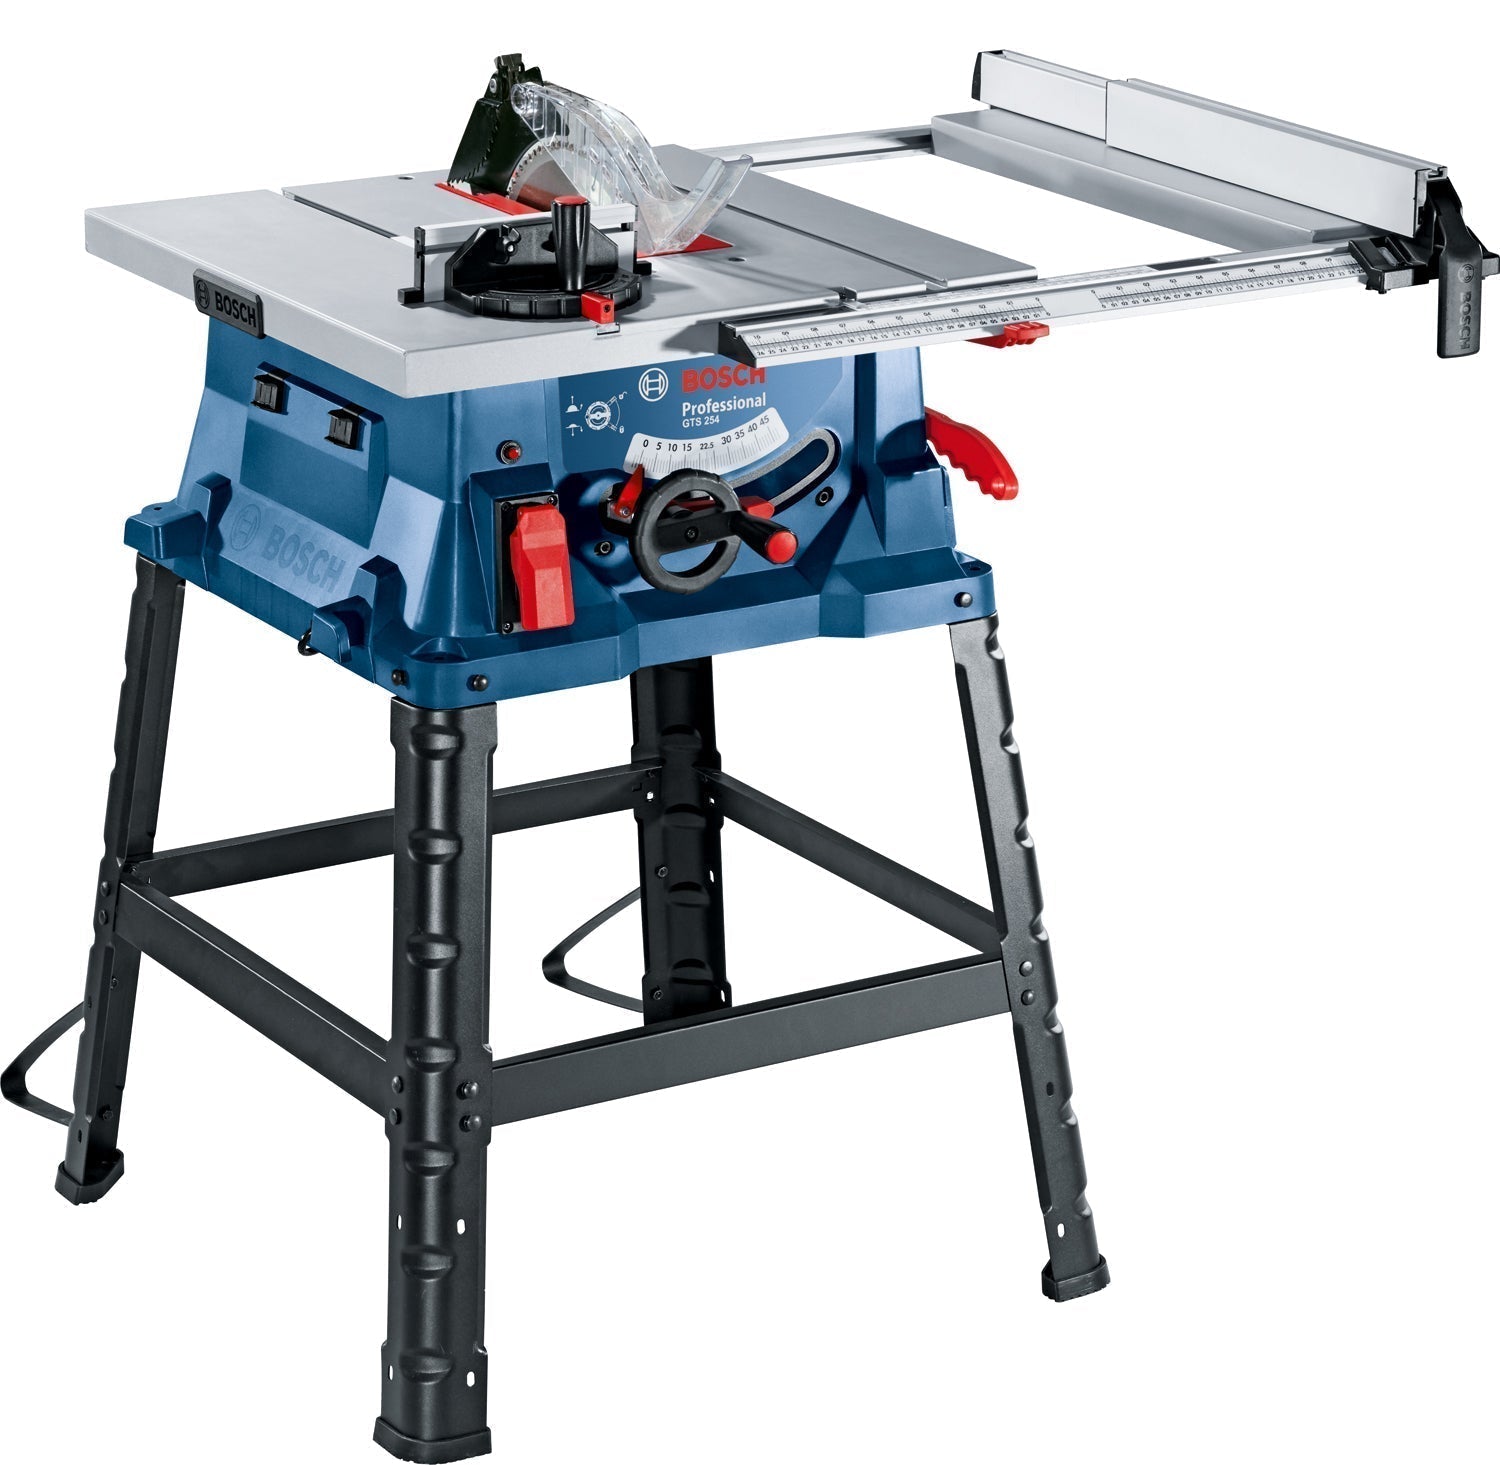 Bosch Professional Table Saw GTS 254 0601B45000 Power Tool Services